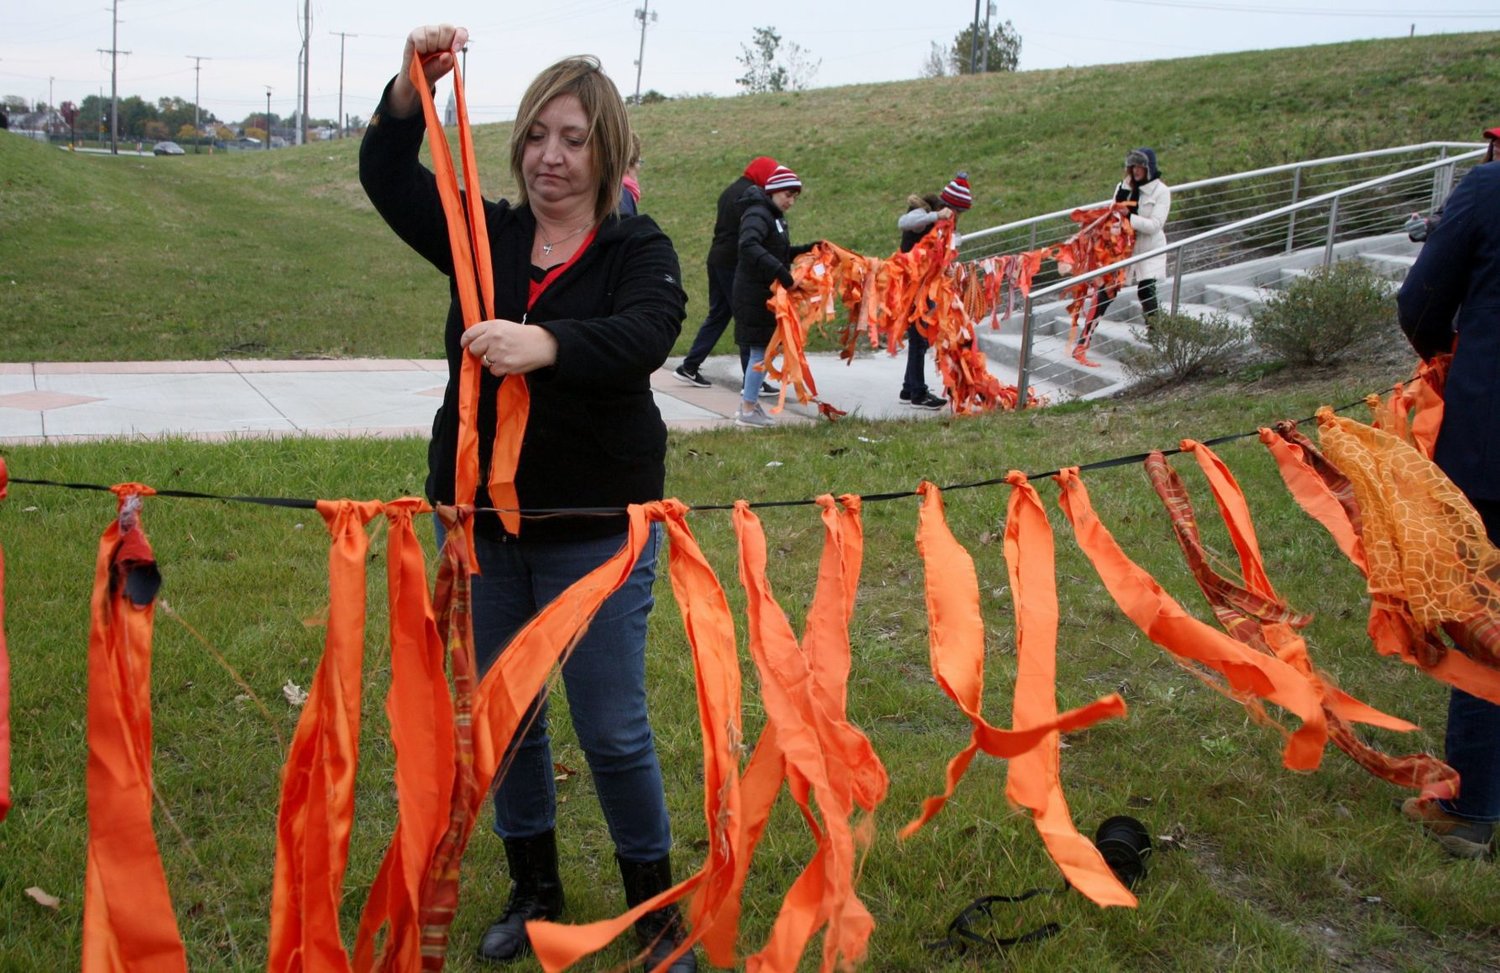 Gidget Griffin, of Michigan City, attaches orange strips to build a chain as a memorial to lives lost to gun violence prior to Saturday’s Moms Demand Action march from Hammond to Chicago. Residents of Indiana and Illinois took part in the march to promote gun safety and related legislation.